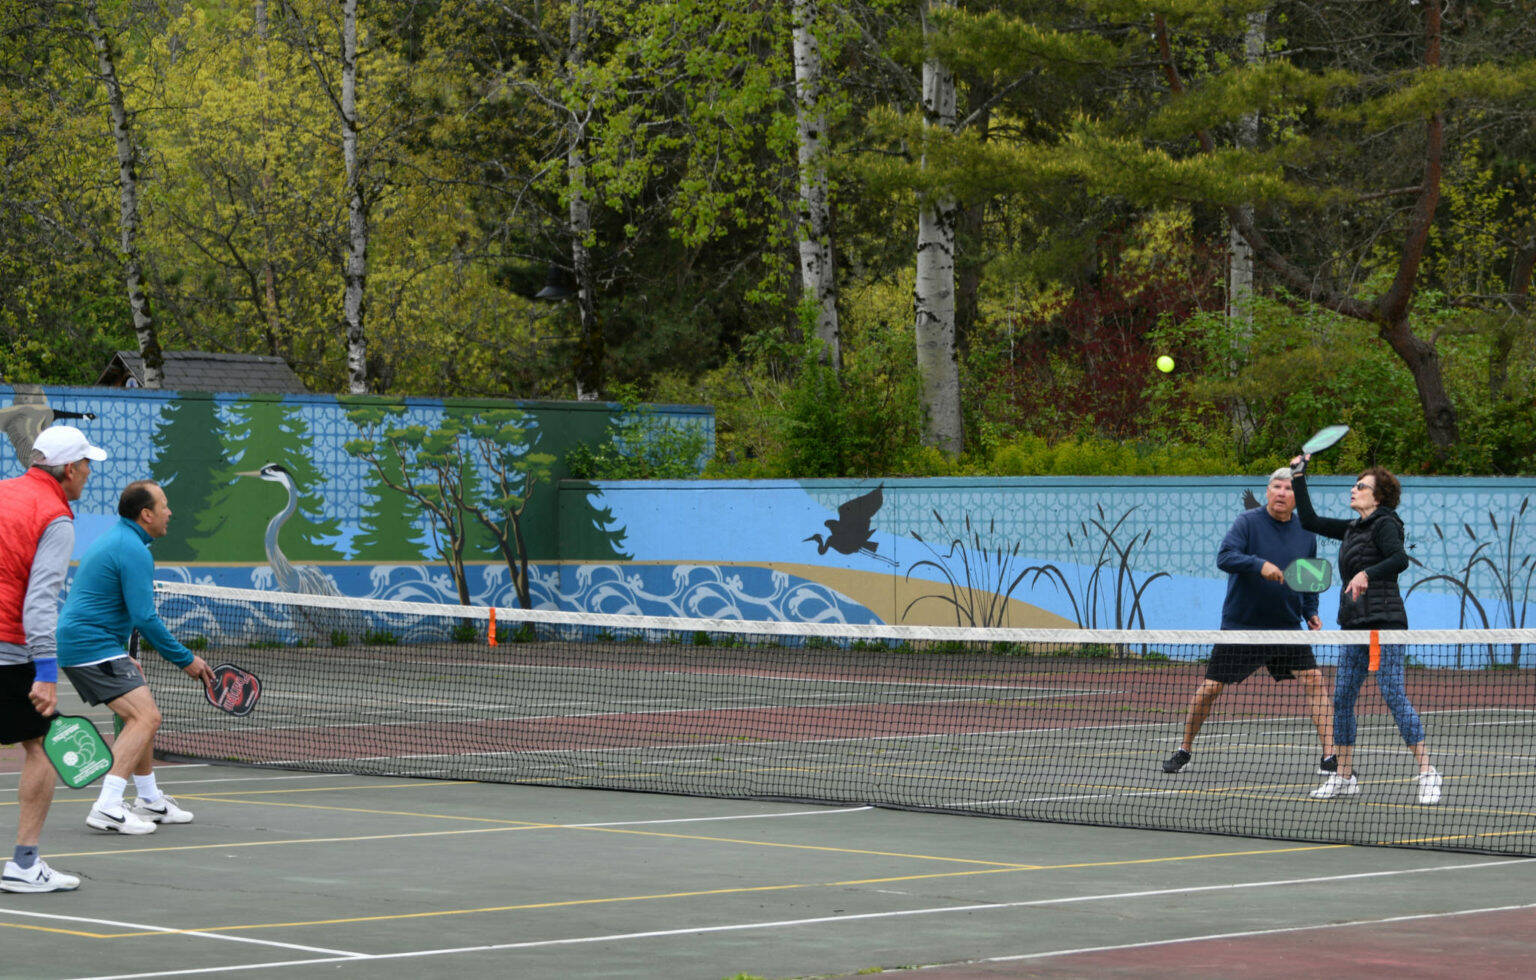 Pickleball players get in some action on the morning of April 27, 2021, at Luther Burbank Park. Carolyn Starr connects with the ball while her partner Tom Krazit covers. Their opponents are Van Rex Gallard, far left, and Tom Robinson. Andy Nystrom/ staff photo